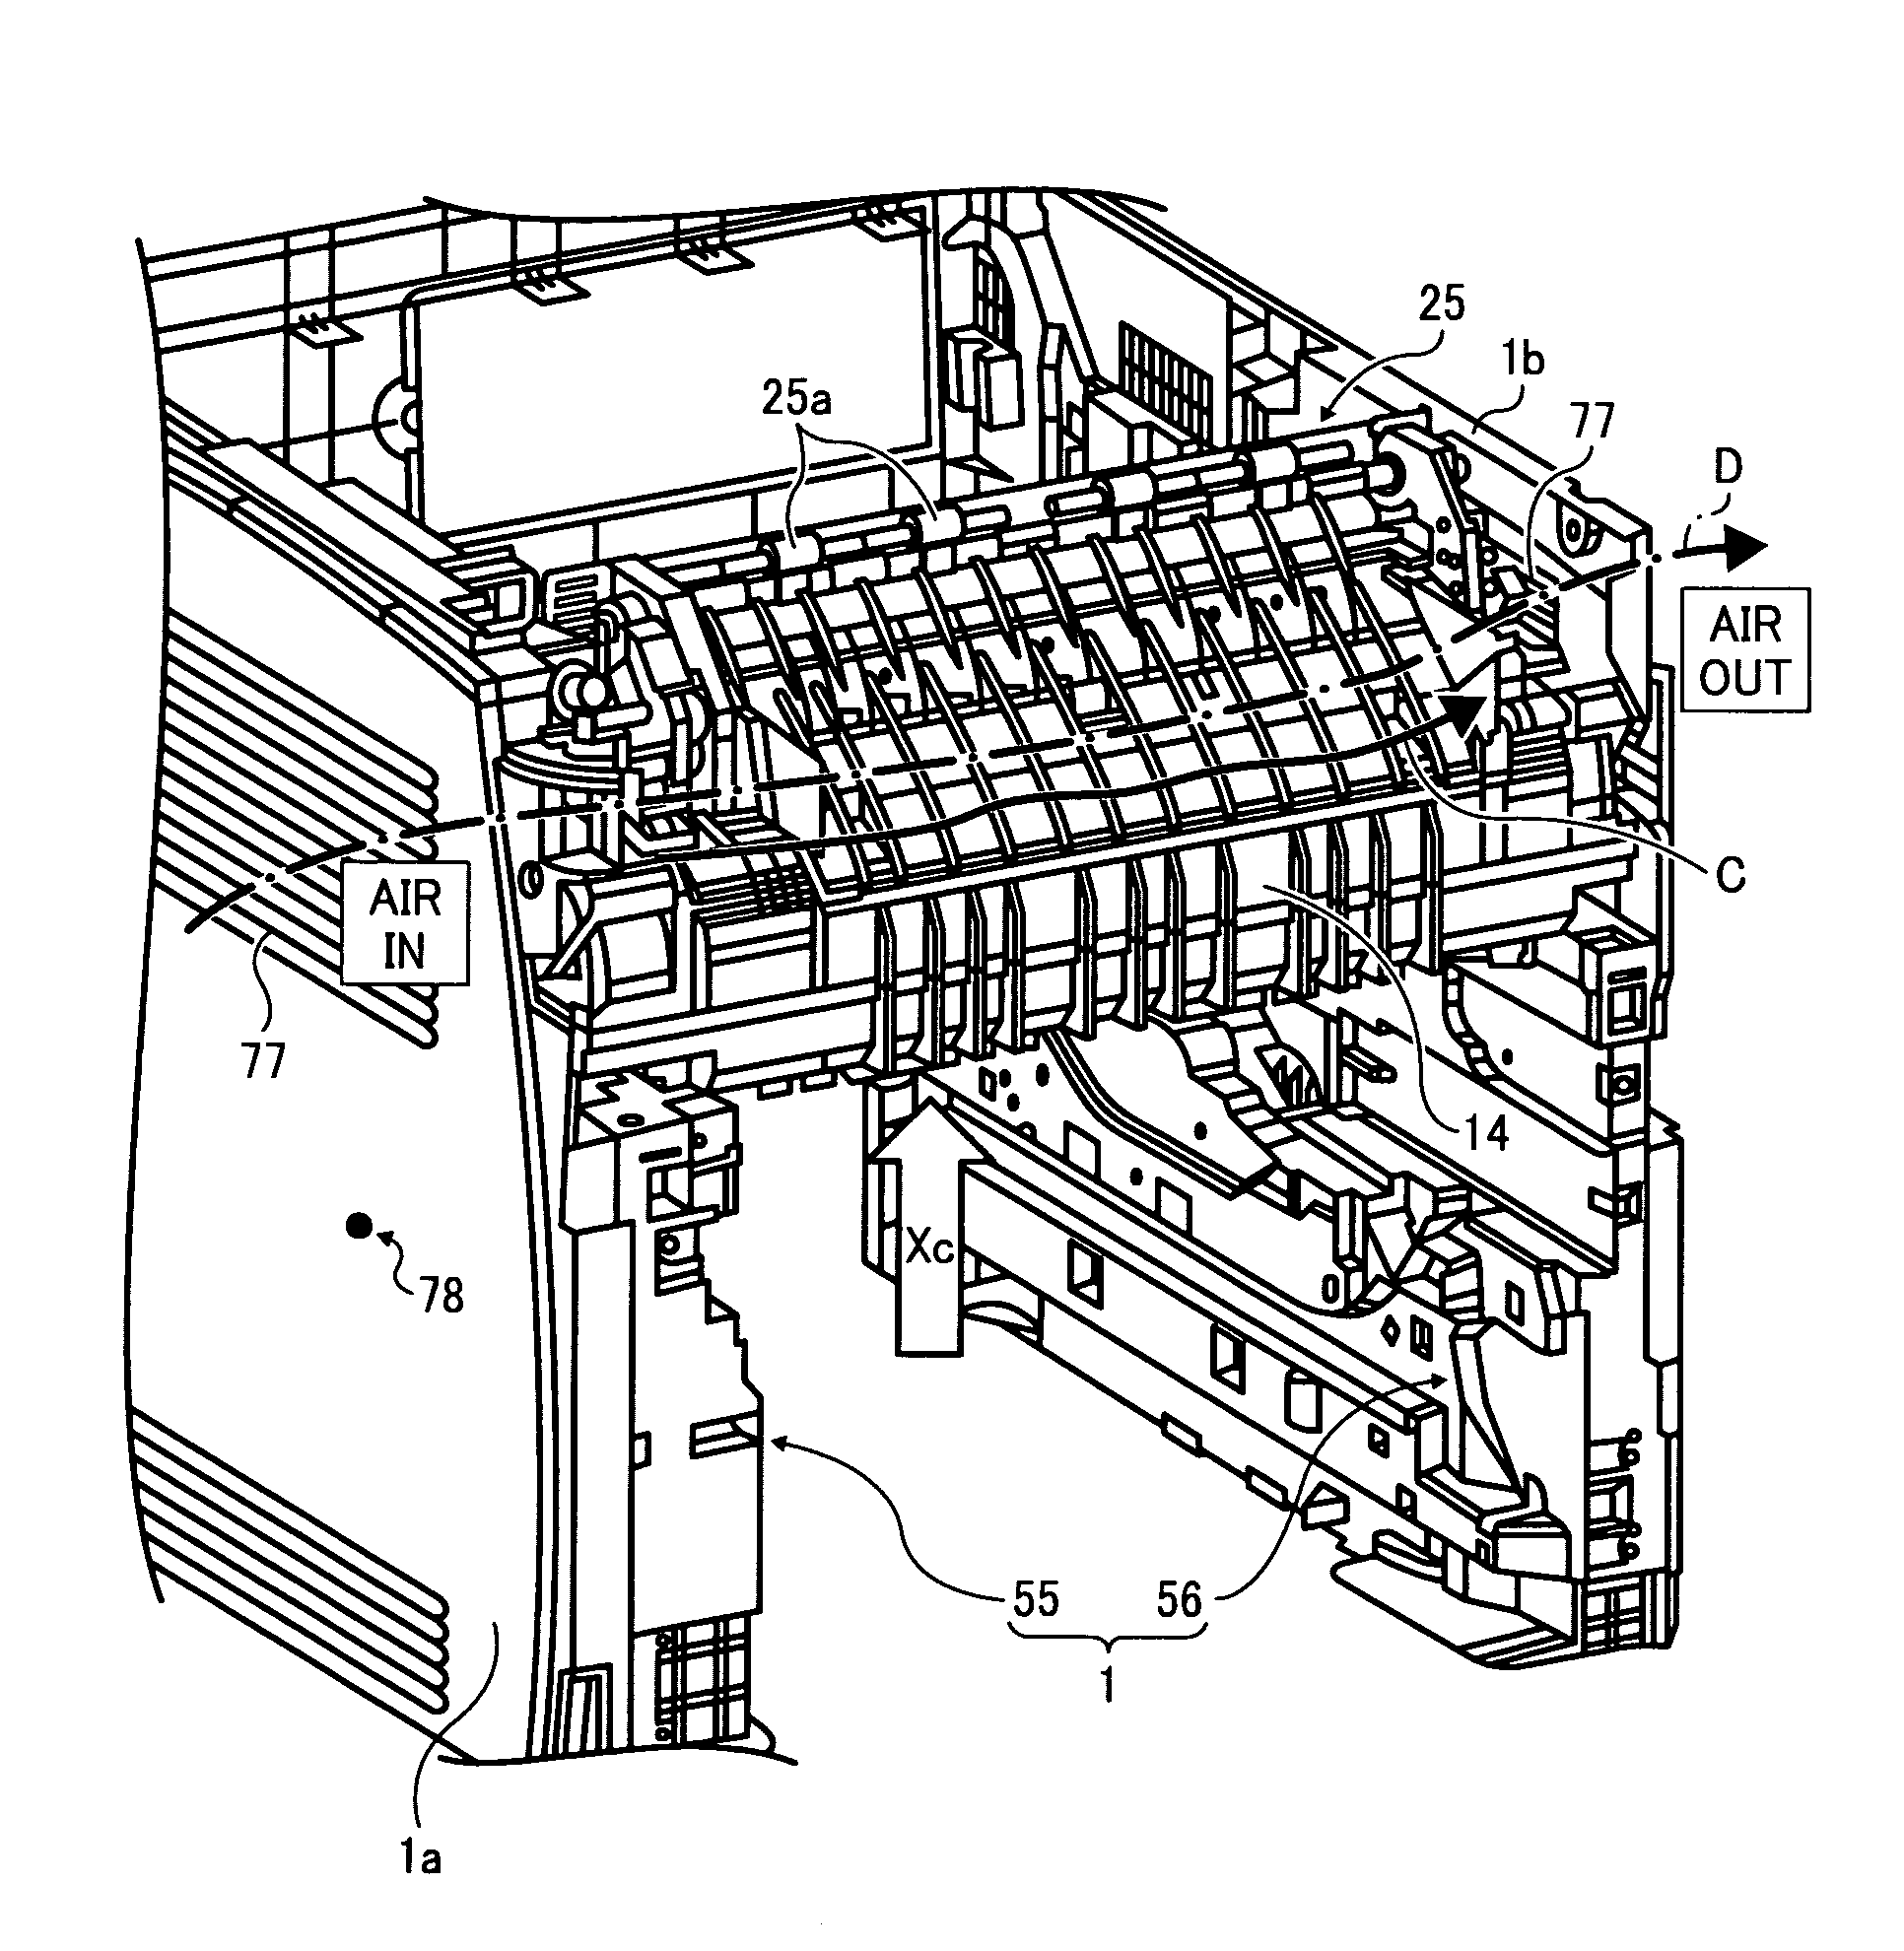 Image forming apparatus including a collecting portion inside guide members to collect and store liquid droplets